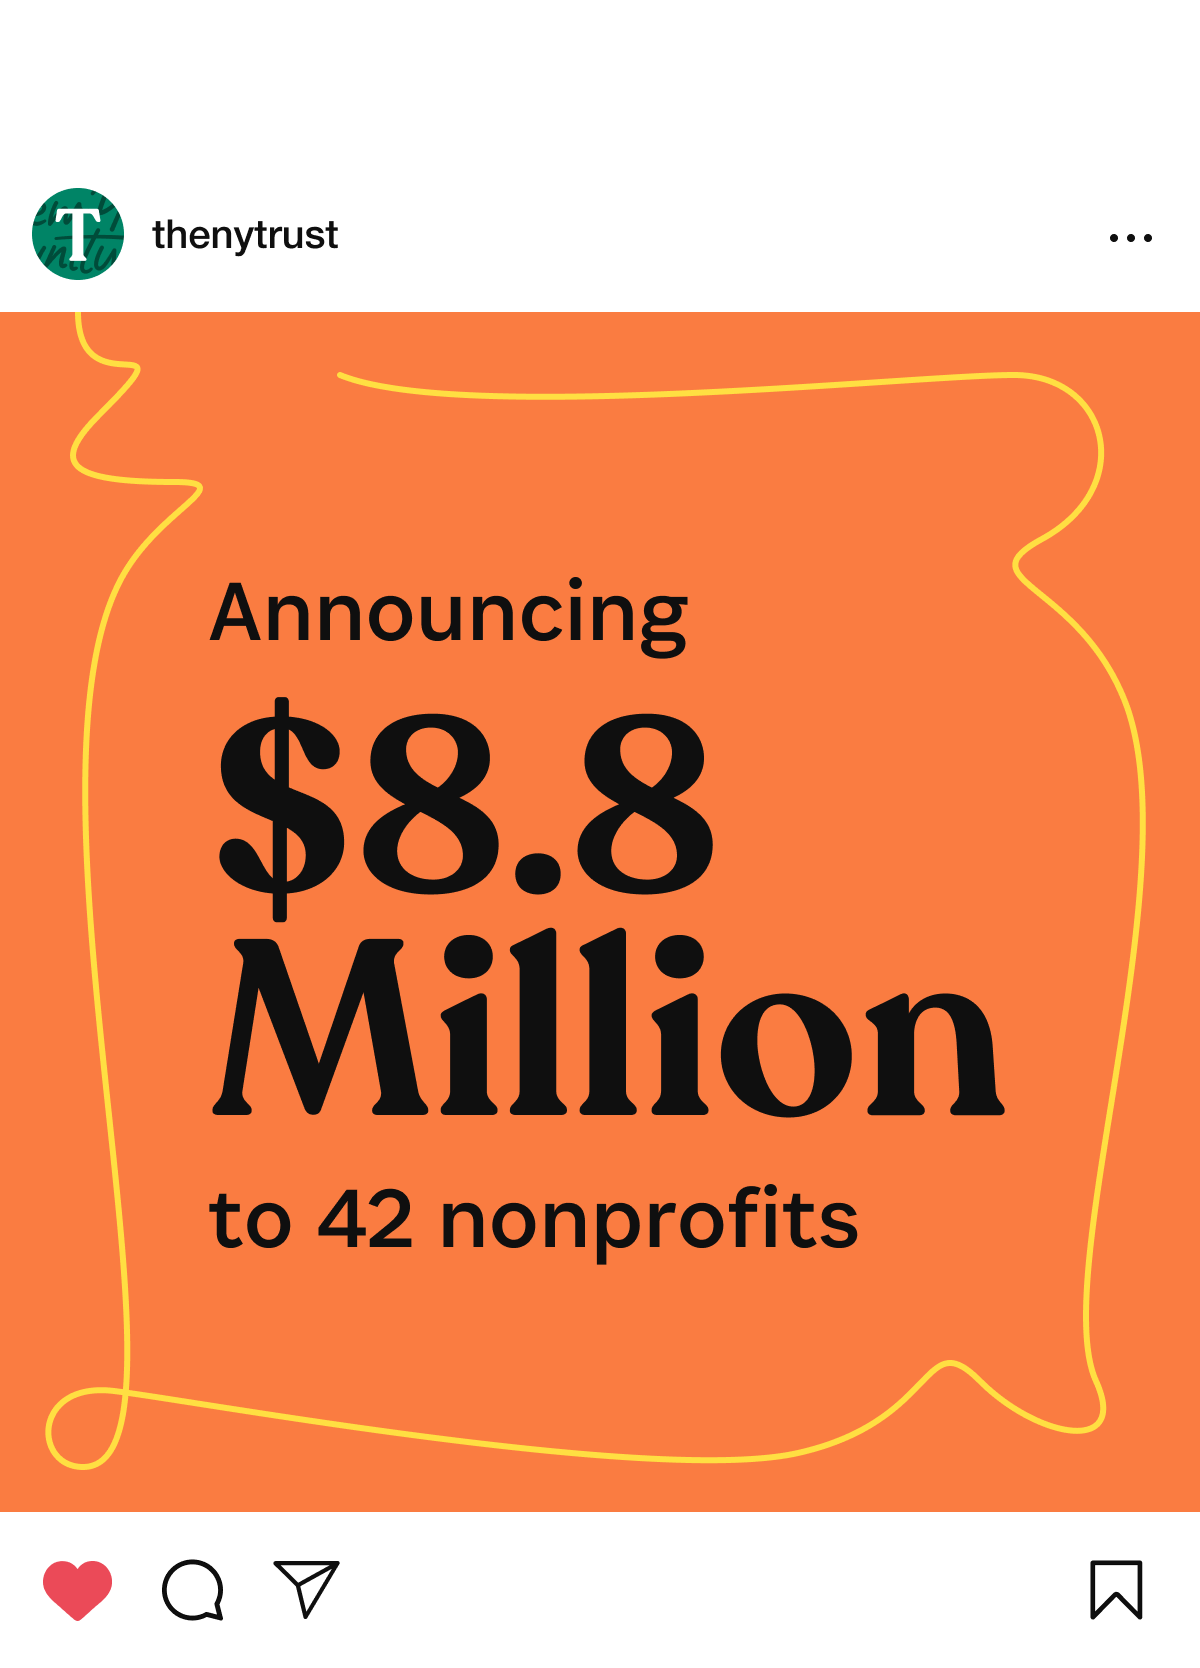 An Instagram post by The NY Trust announces $8.8 million in funding to 42 nonprofits. The text is written in bold black font on an orange background with a yellow, hand-drawn outline.